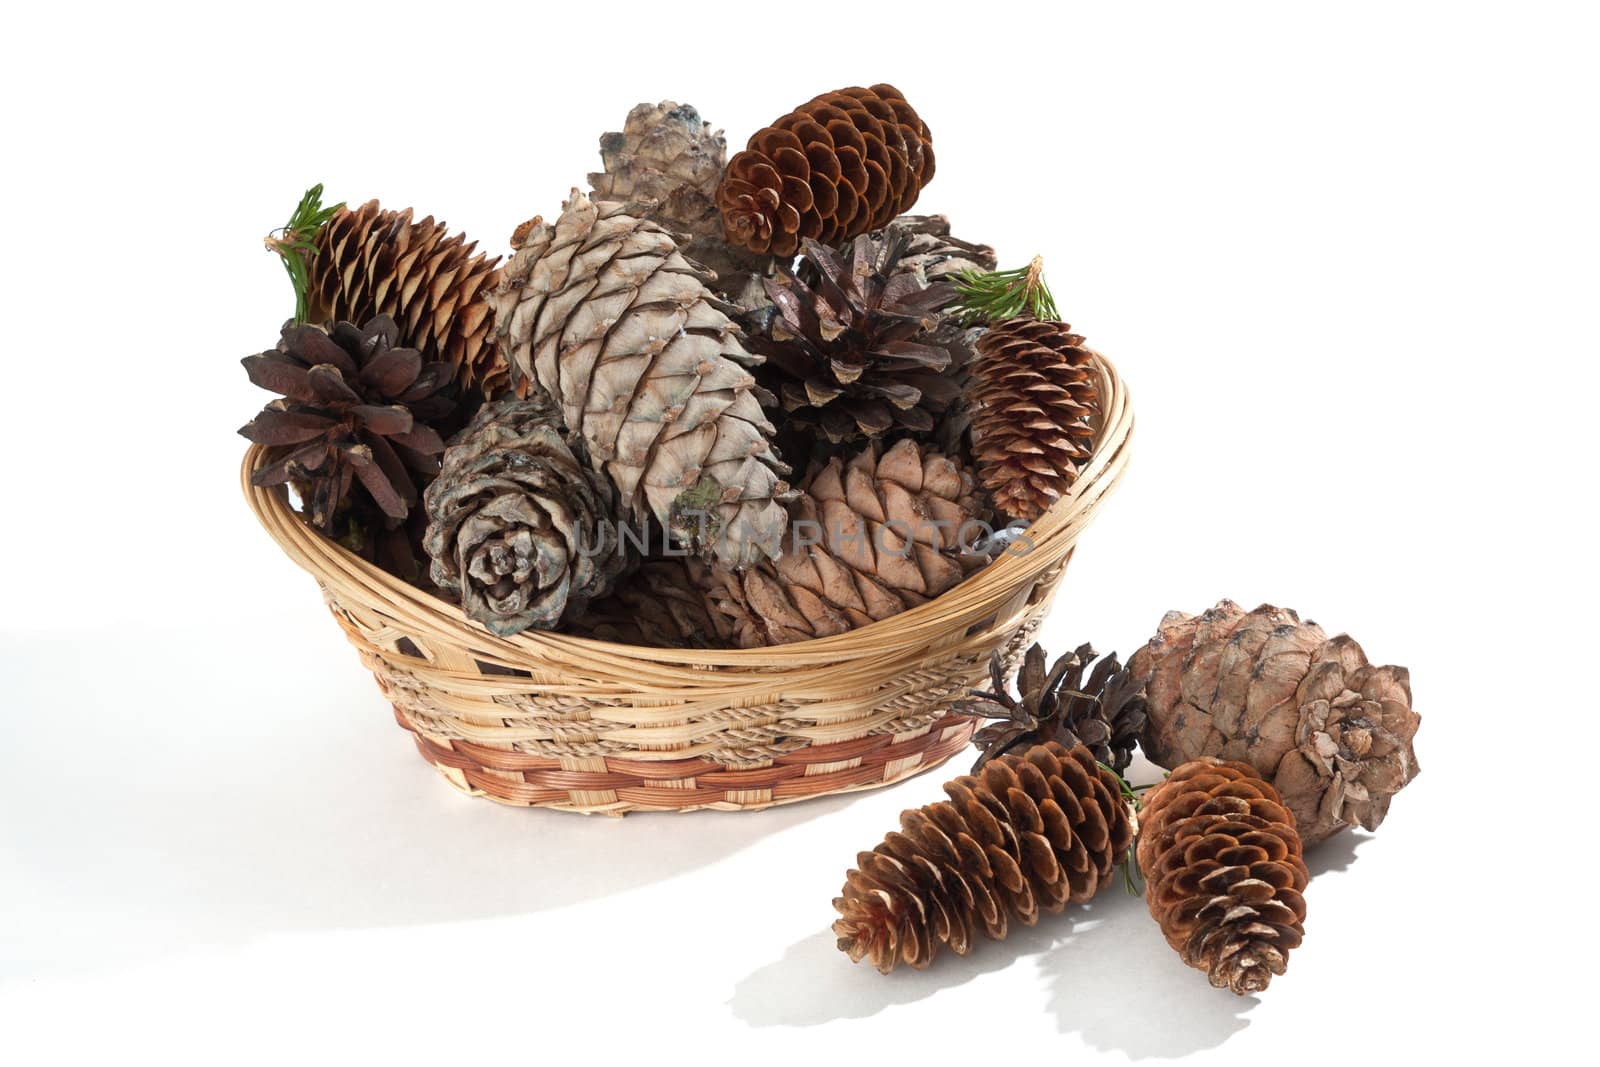 Pine, fur-tree and cedar cones in a basket on a white background